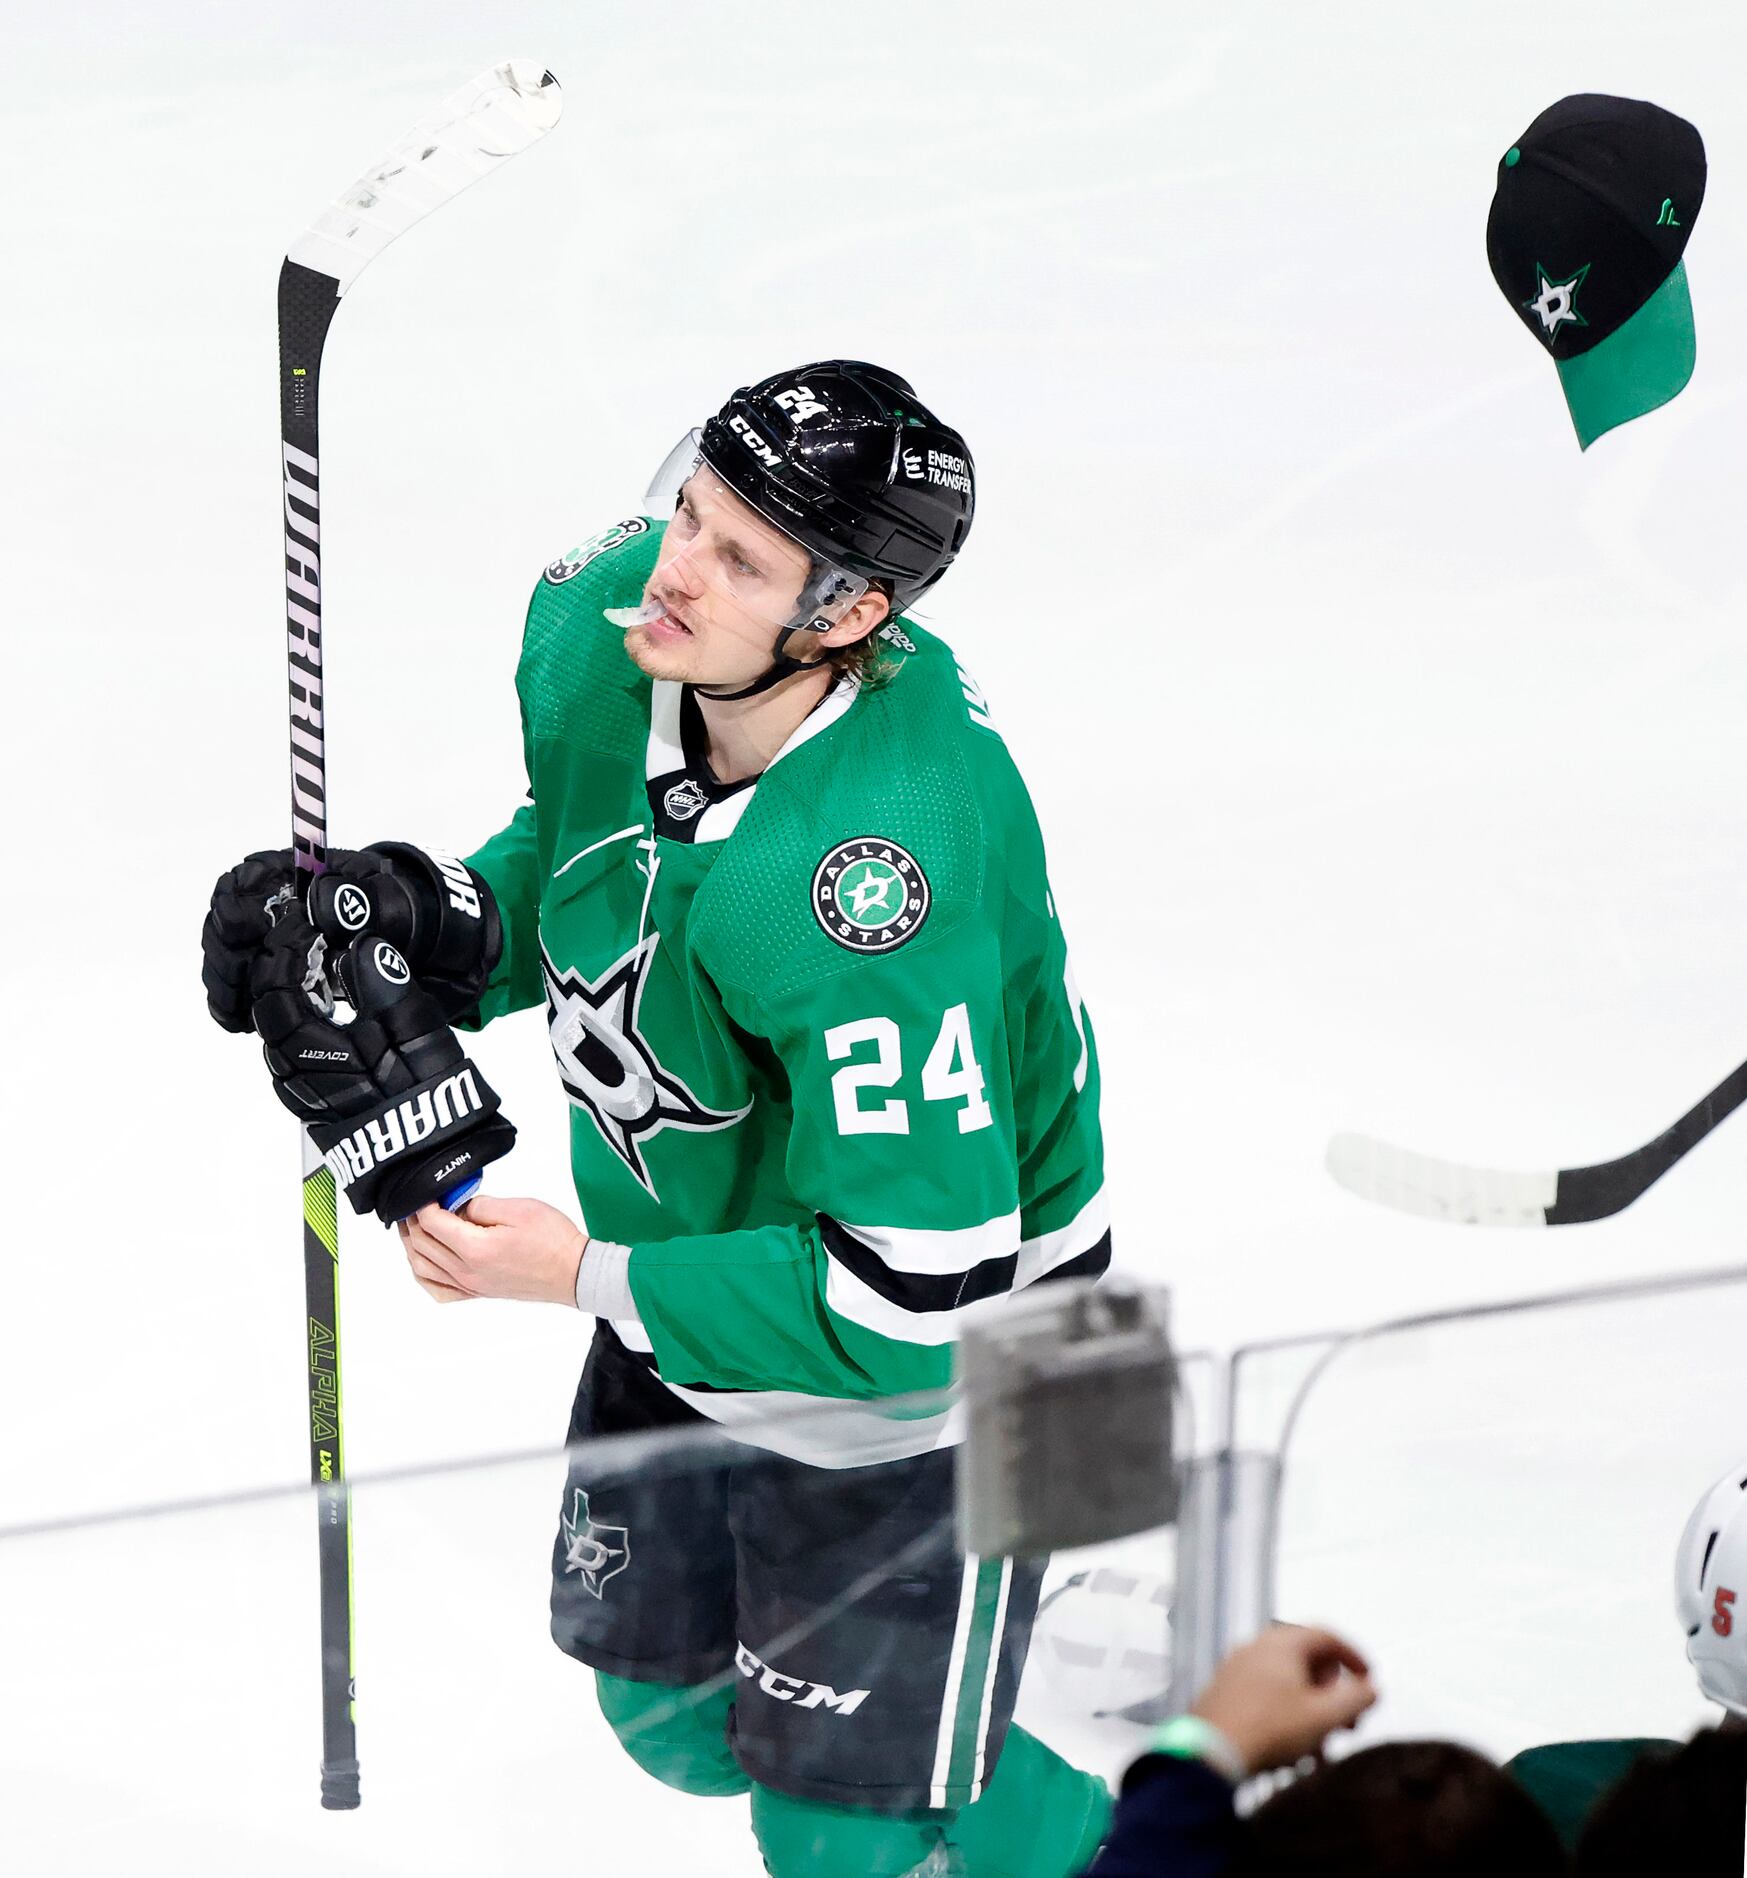 Photos: Hats off to Roope Hintz and the Dallas Stars' Game 2 victory